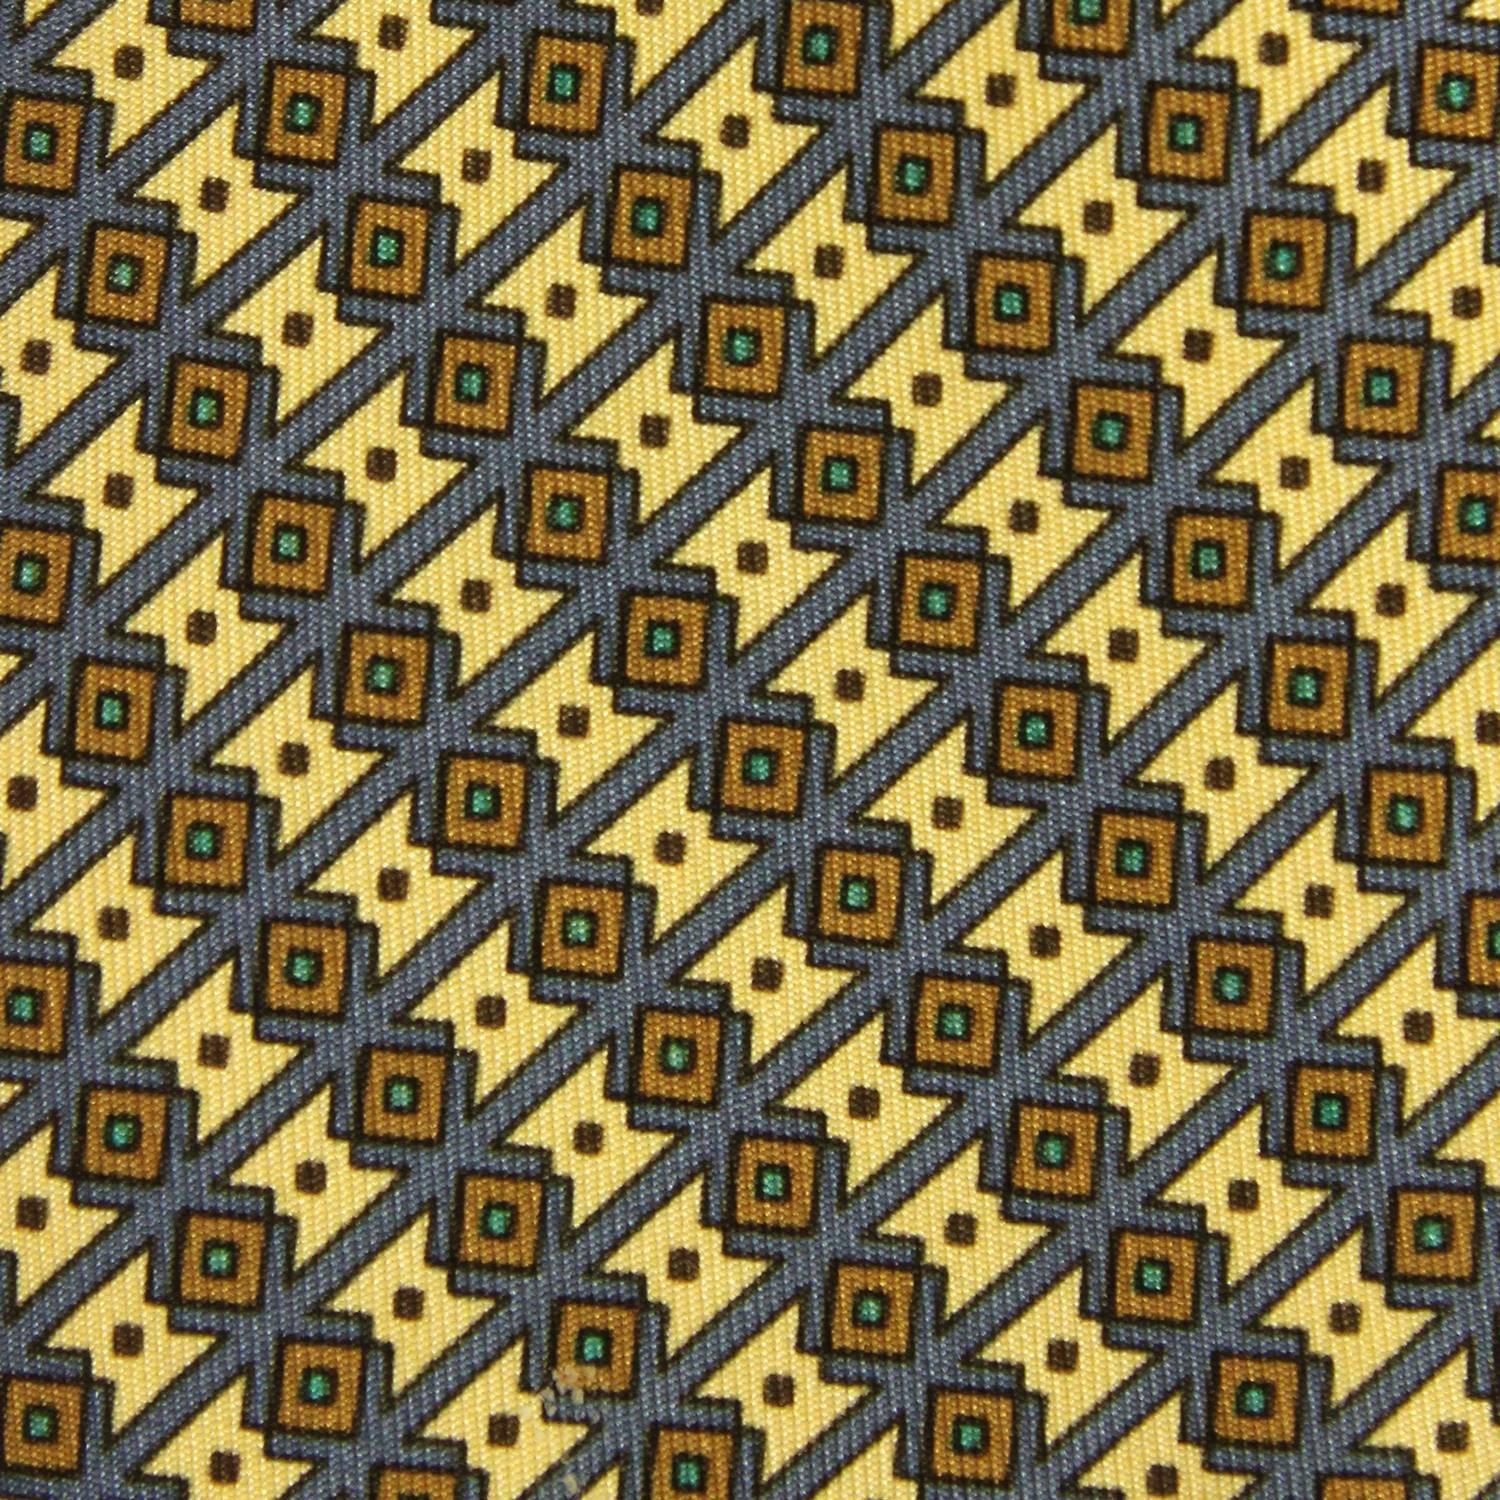 A.N.G.E.L.O. Vintage - Italy

Lively Hermès 100% silk printed tie with a geometric pattern in yellow and light blue colors. The item is vintage, it was produced in the 1990s and is in excellent conditions, flawless. Width: 7
